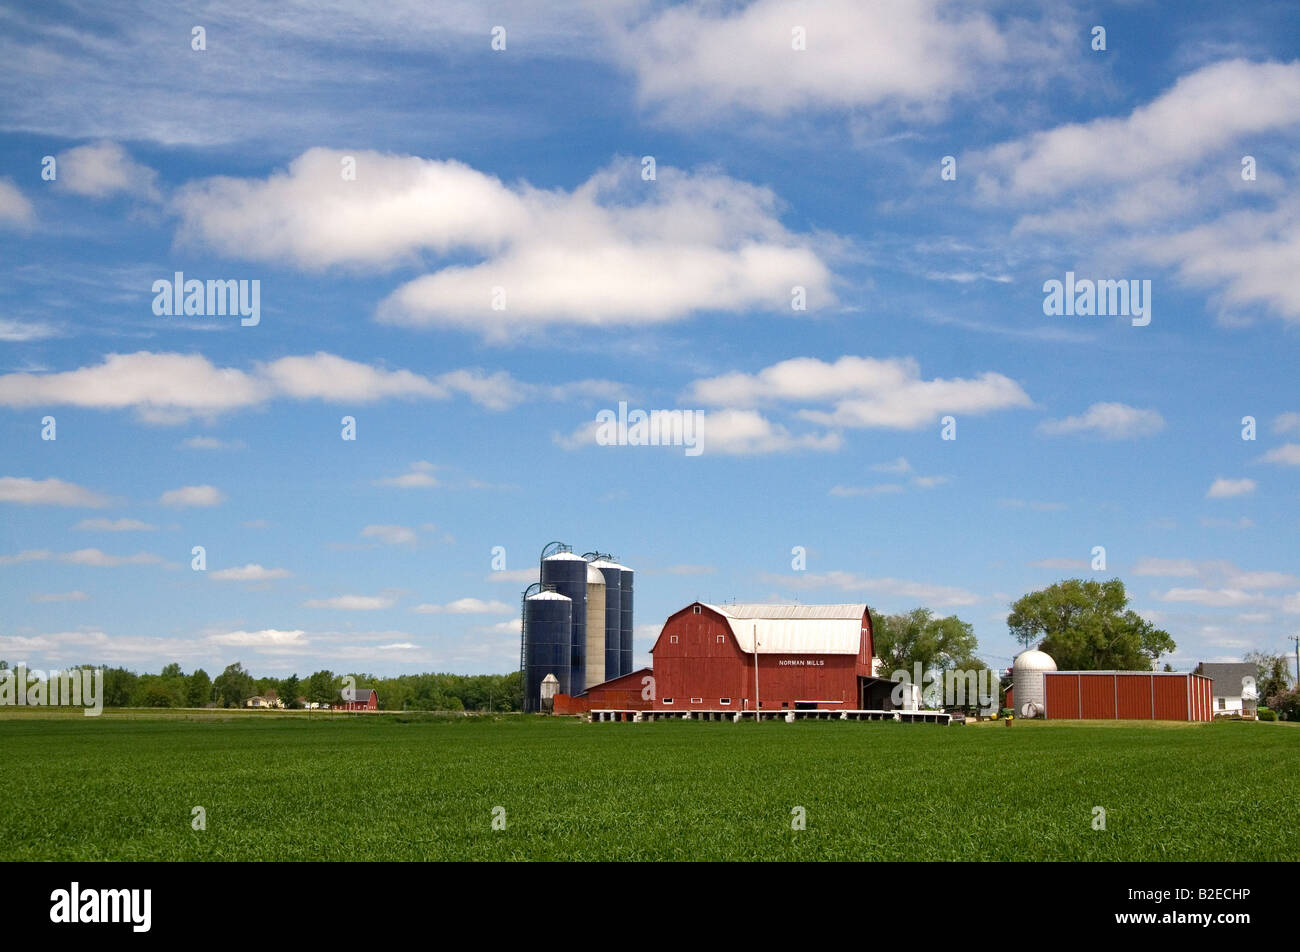 Farm surrounded by green unripe wheat at St Louis Michigan Stock Photo